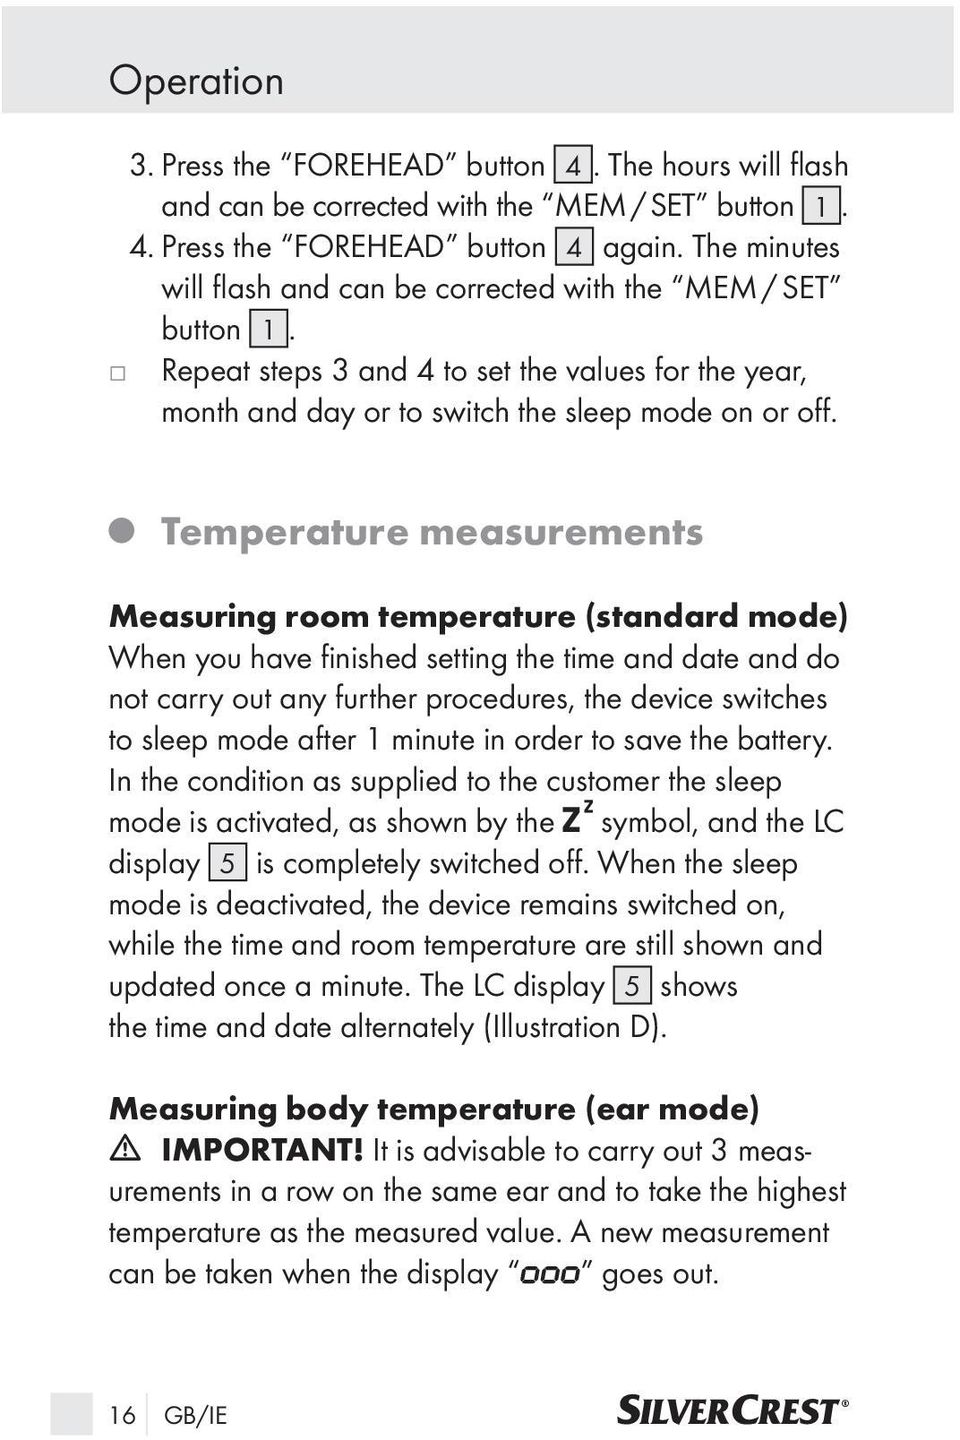 Temperature measurements Measuring room temperature (standard mode) When you have fi nished setting the time and date and do not carry out any further procedures, the device switches to sleep mode